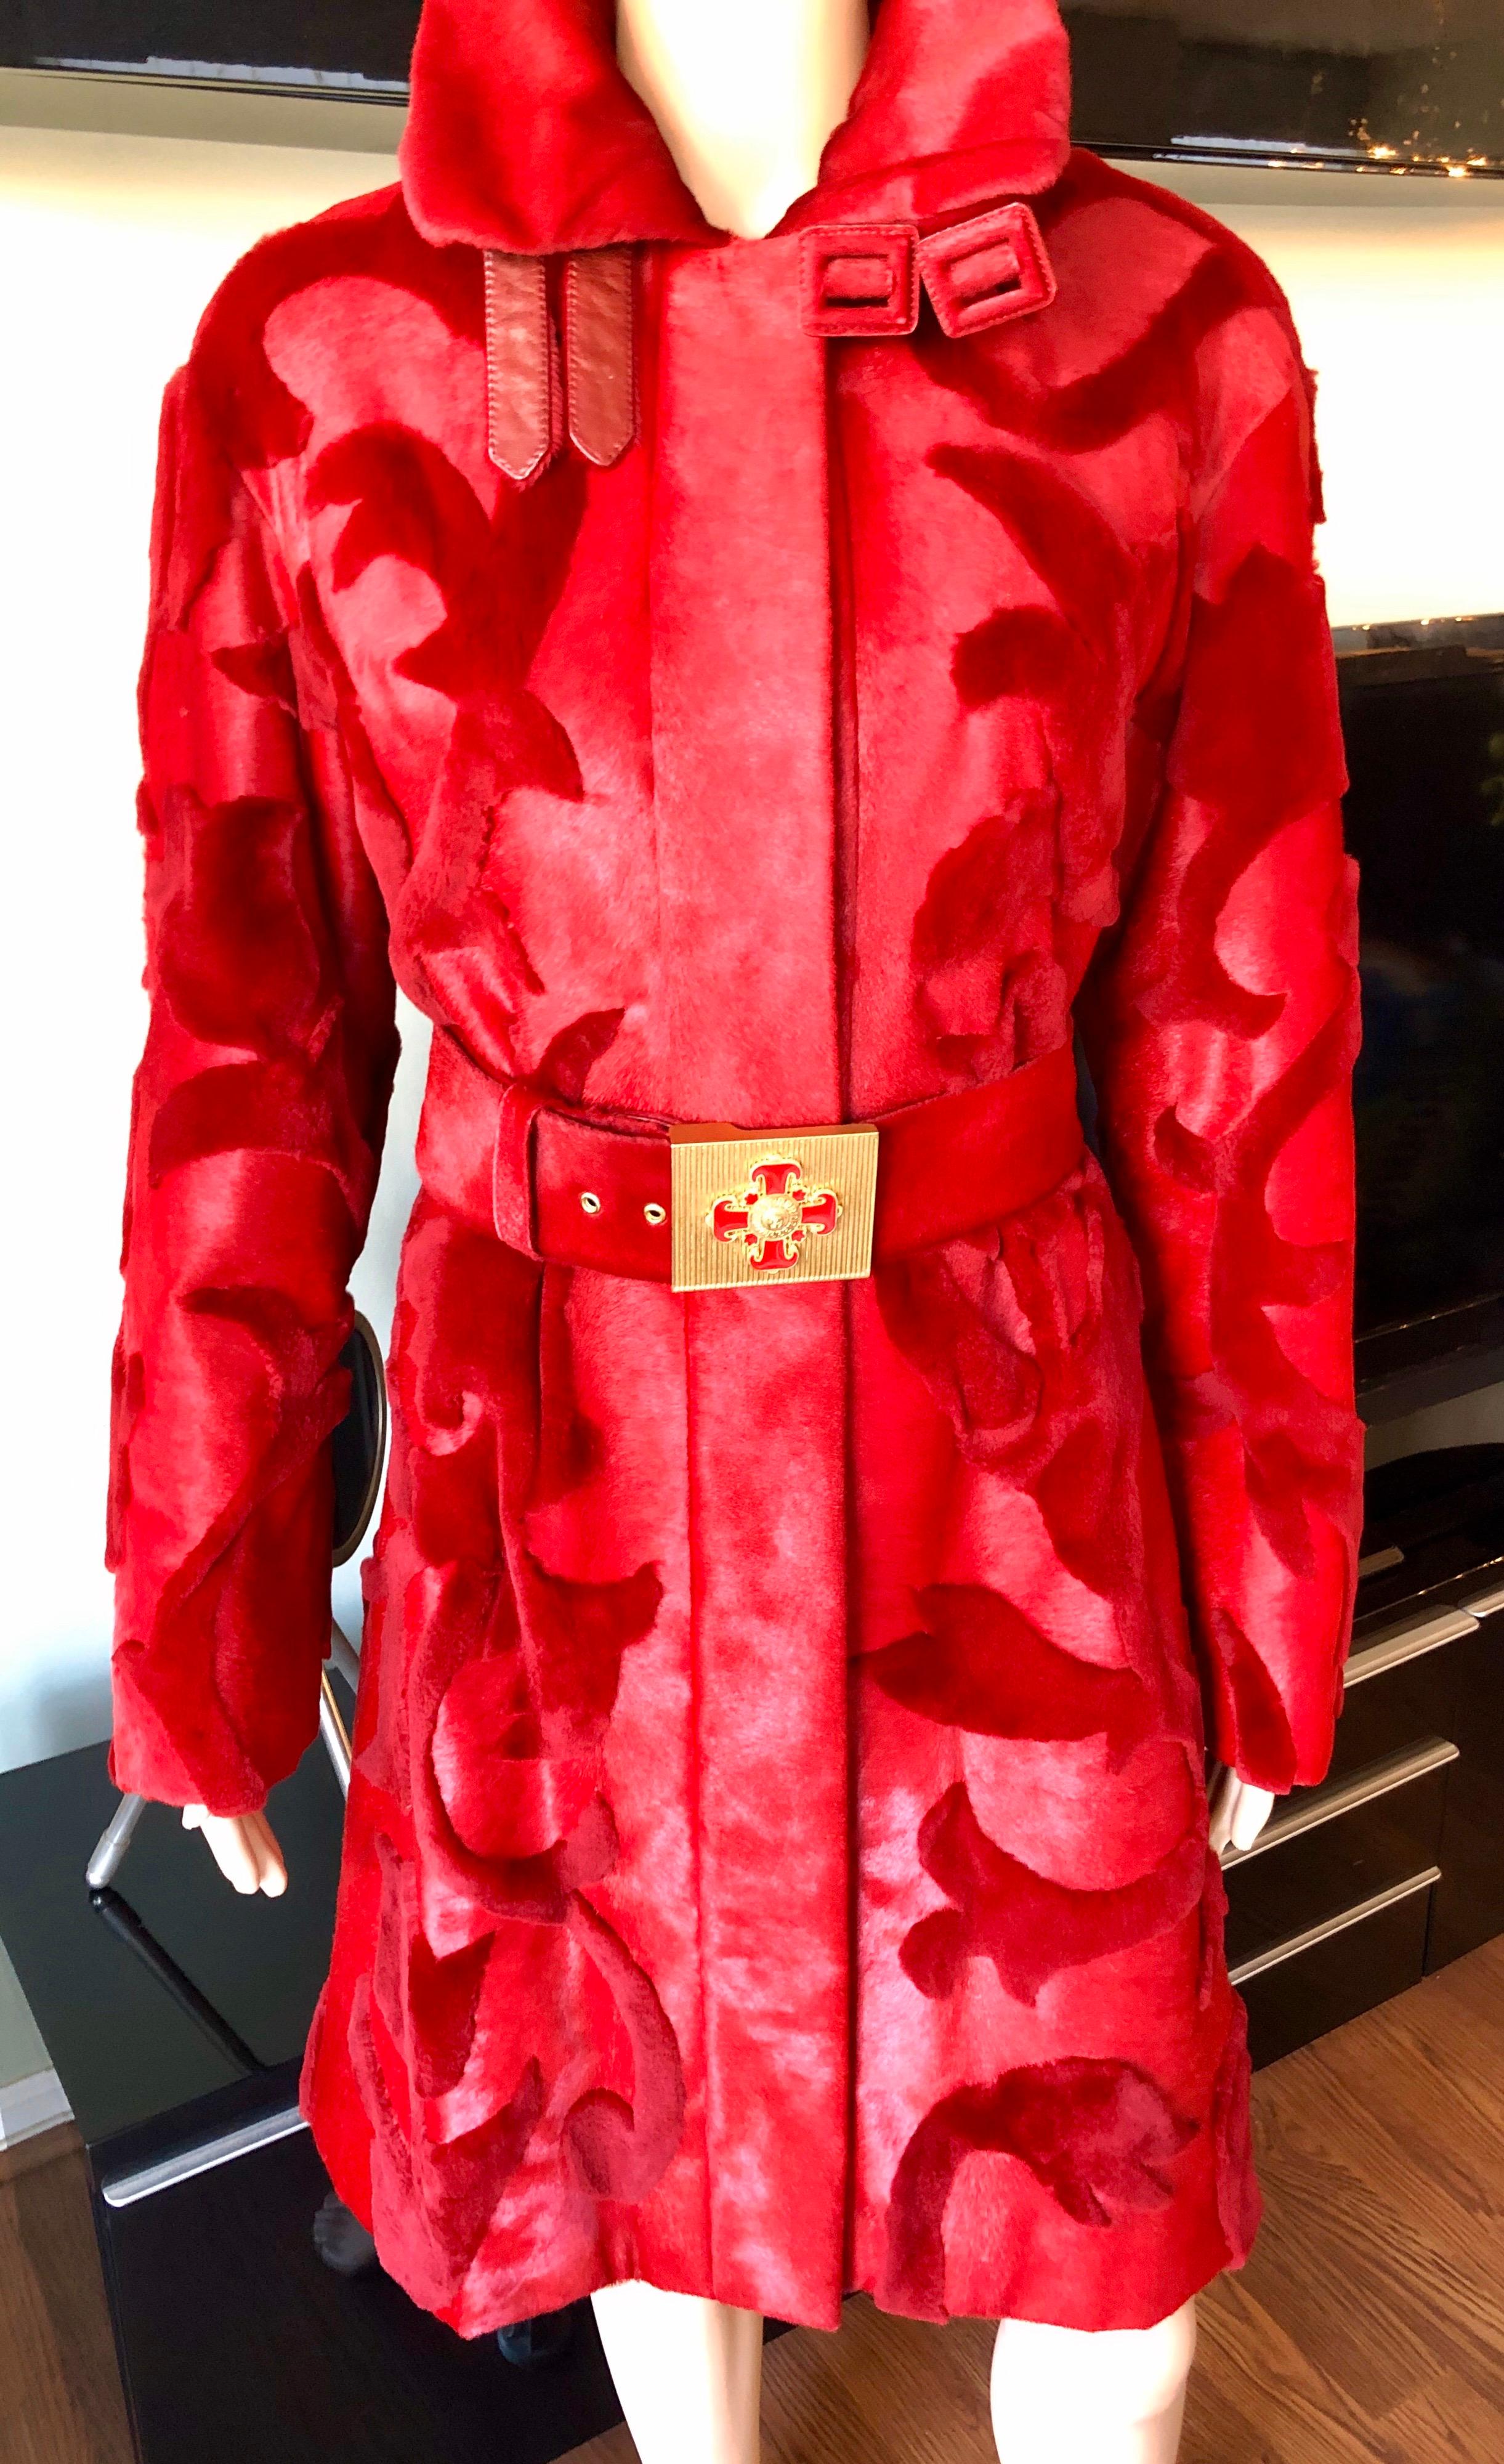 Versace F/W 2011 Runway Mink Fur and Leather Belted Knee-Length Red Jacket Coat In Good Condition For Sale In Naples, FL